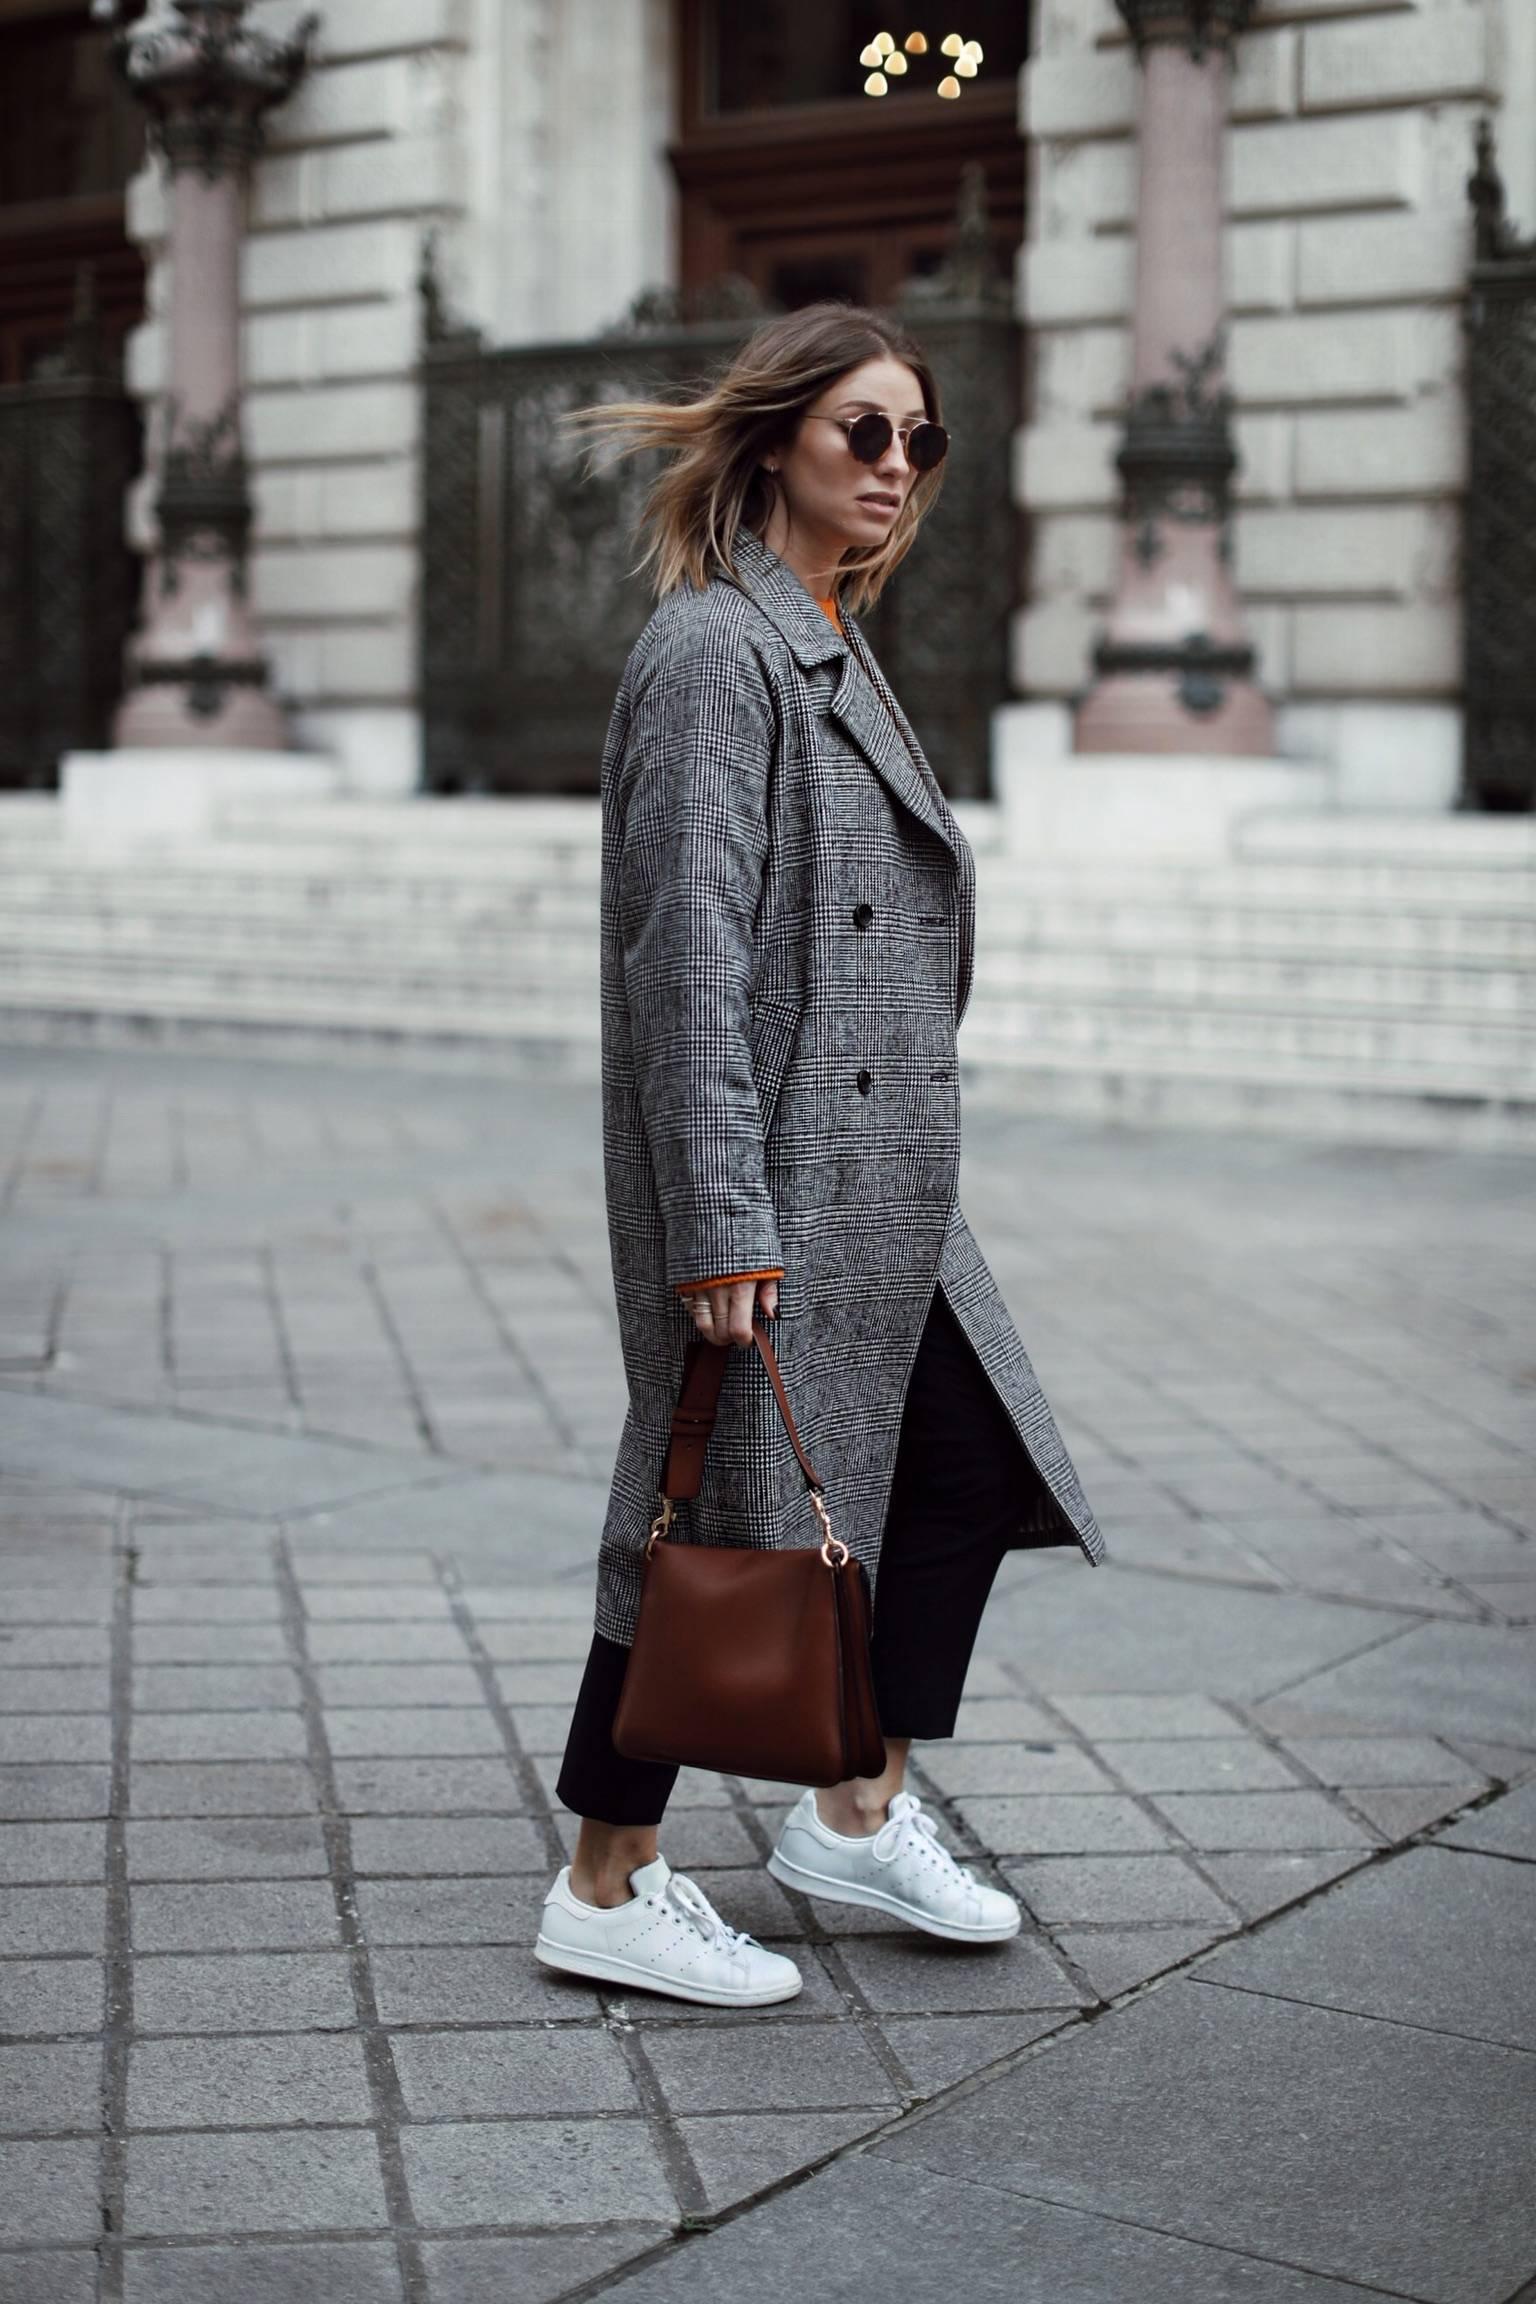 Style and beauty blogger Jill Lansky of The August Diaries on what to wear when traveling in plaid coat, sneakers, acne sweater